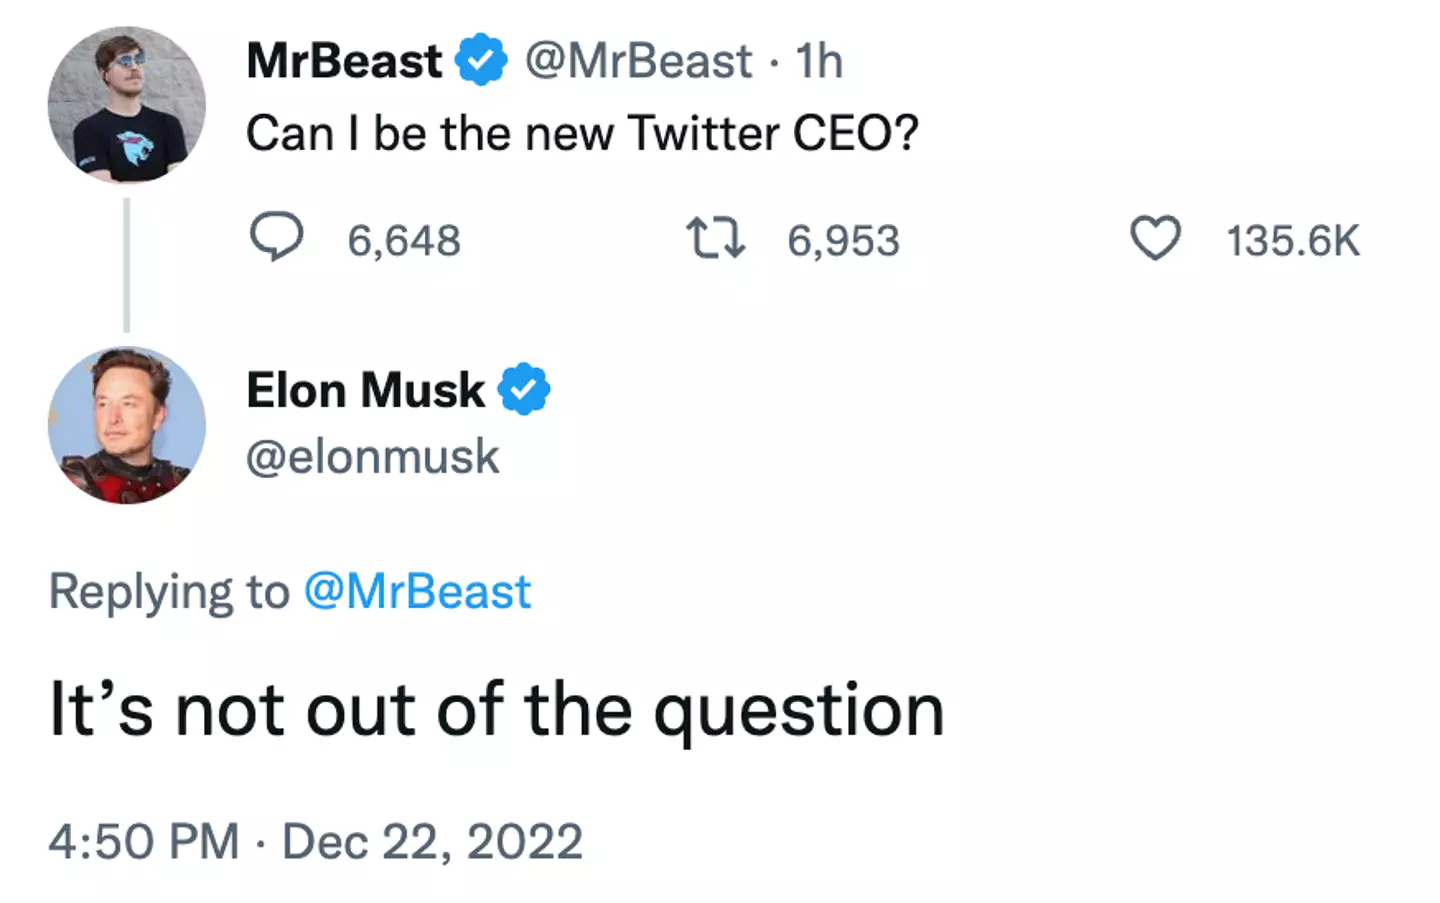 MrBeast has thrown his hat in the ring.